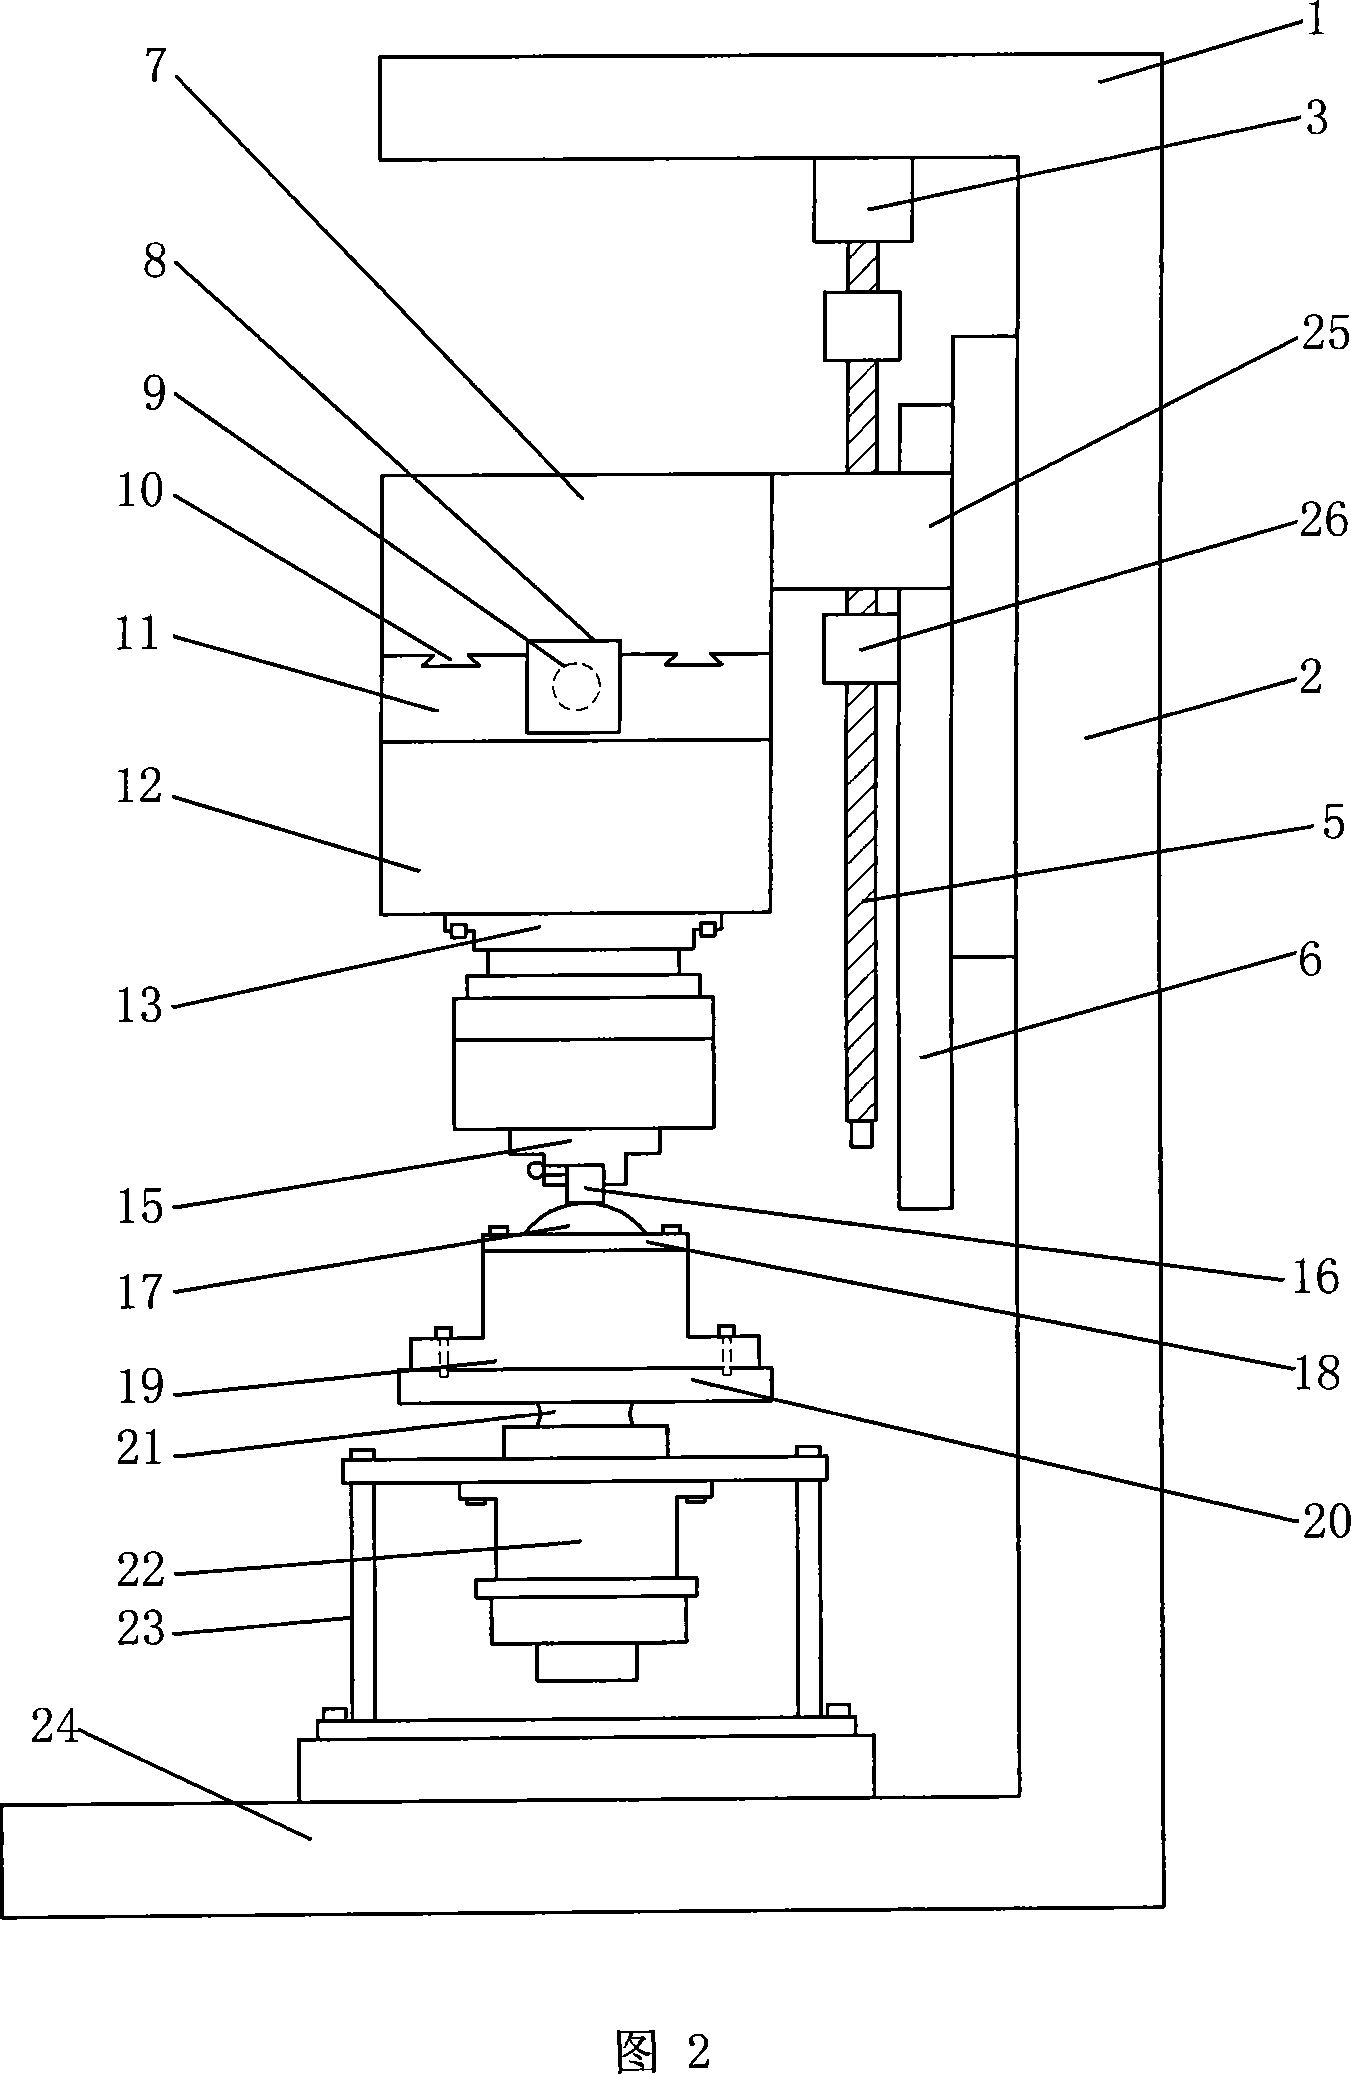 Twisting or micro-moving frictional wear test method and device thereof